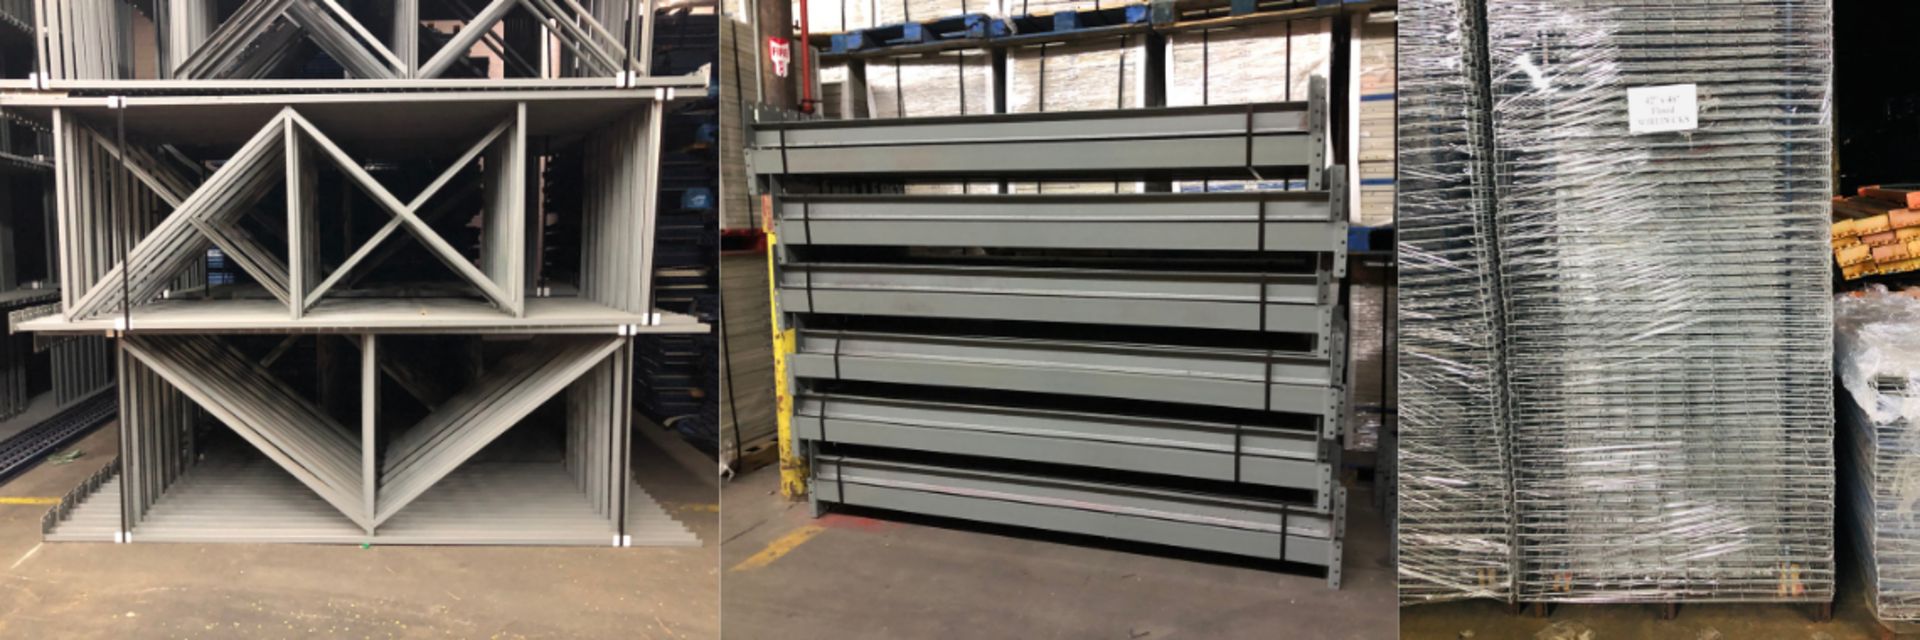 14 BAYS OF 10.5'H X 42"D X 93"L STRUCTURAL STYLE PALLET RACKS - Image 3 of 6